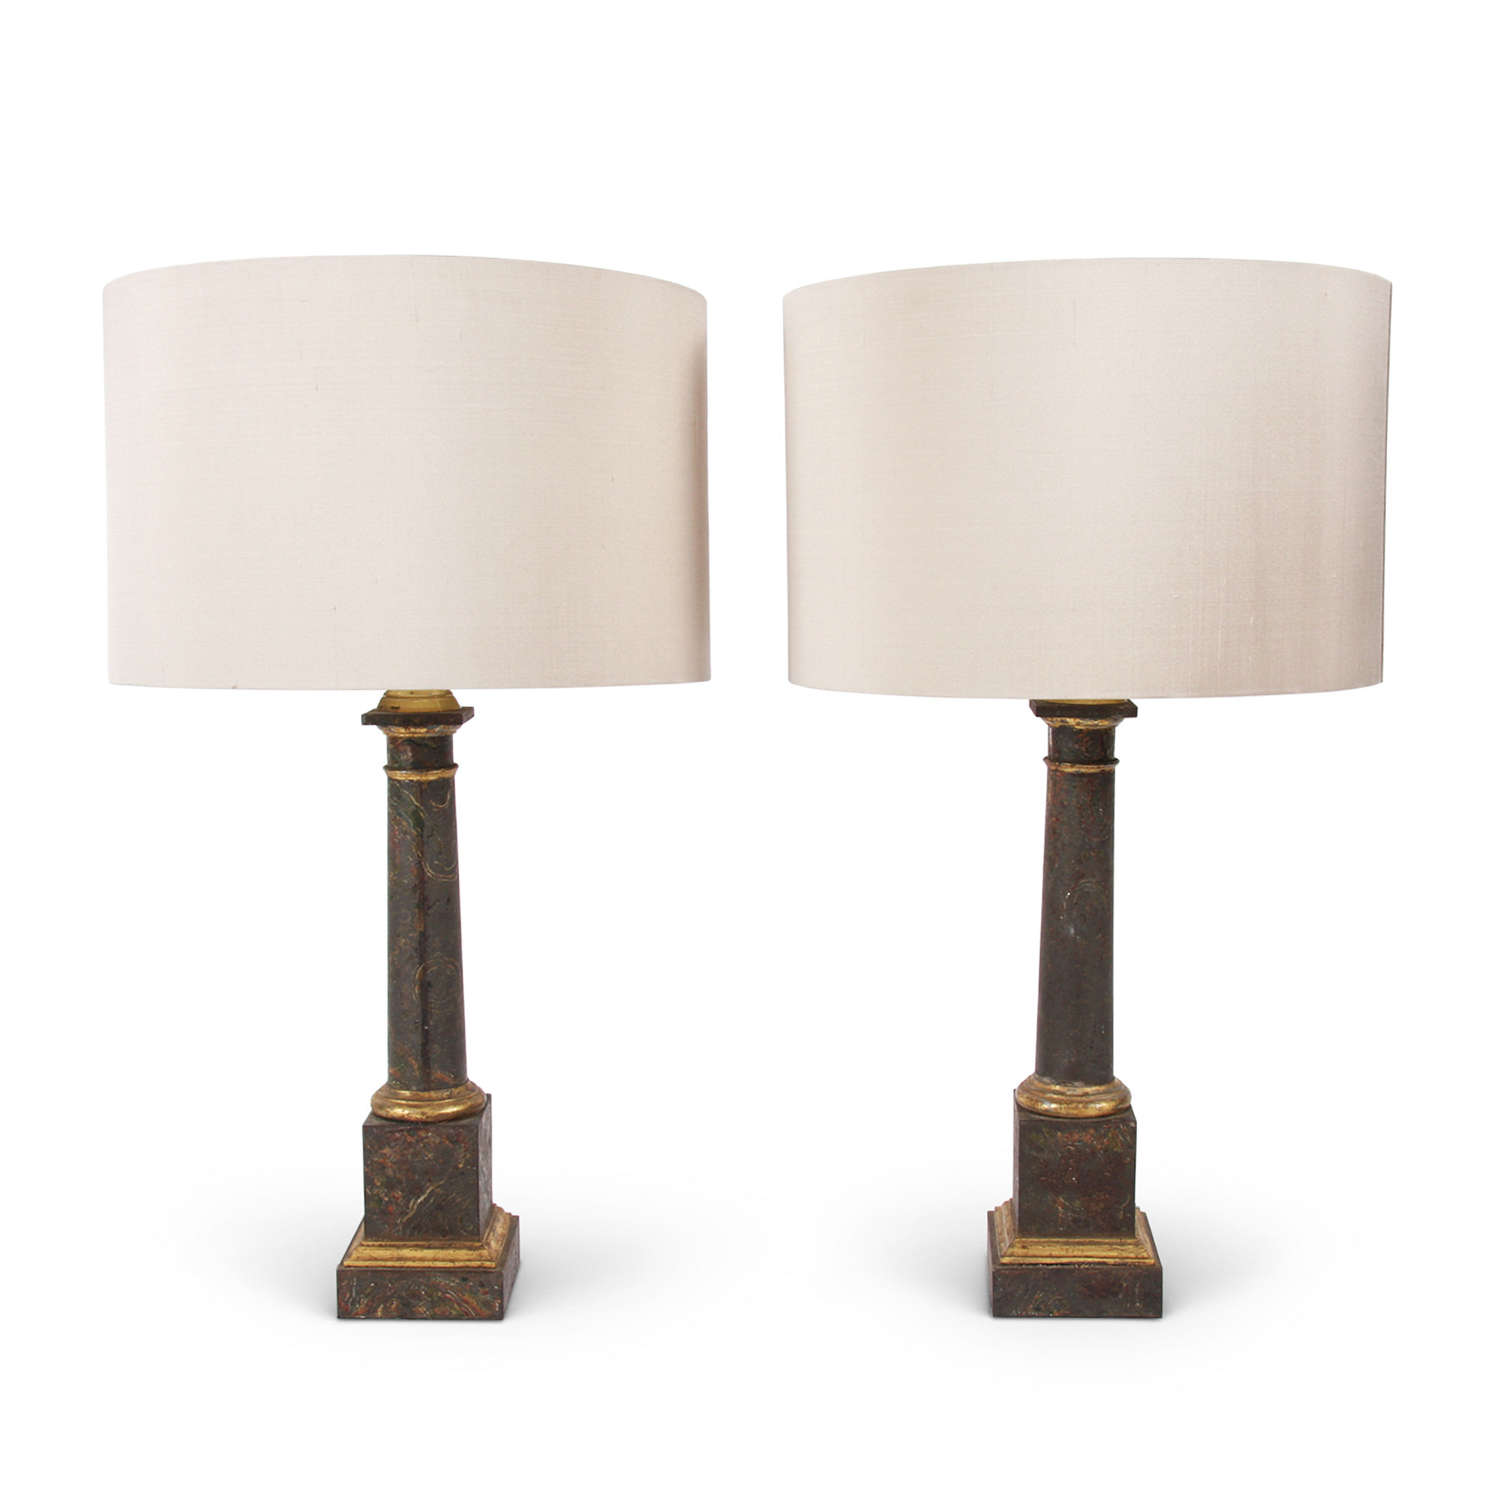 Pair of French Mid-Century Faux Marble Table Lamps